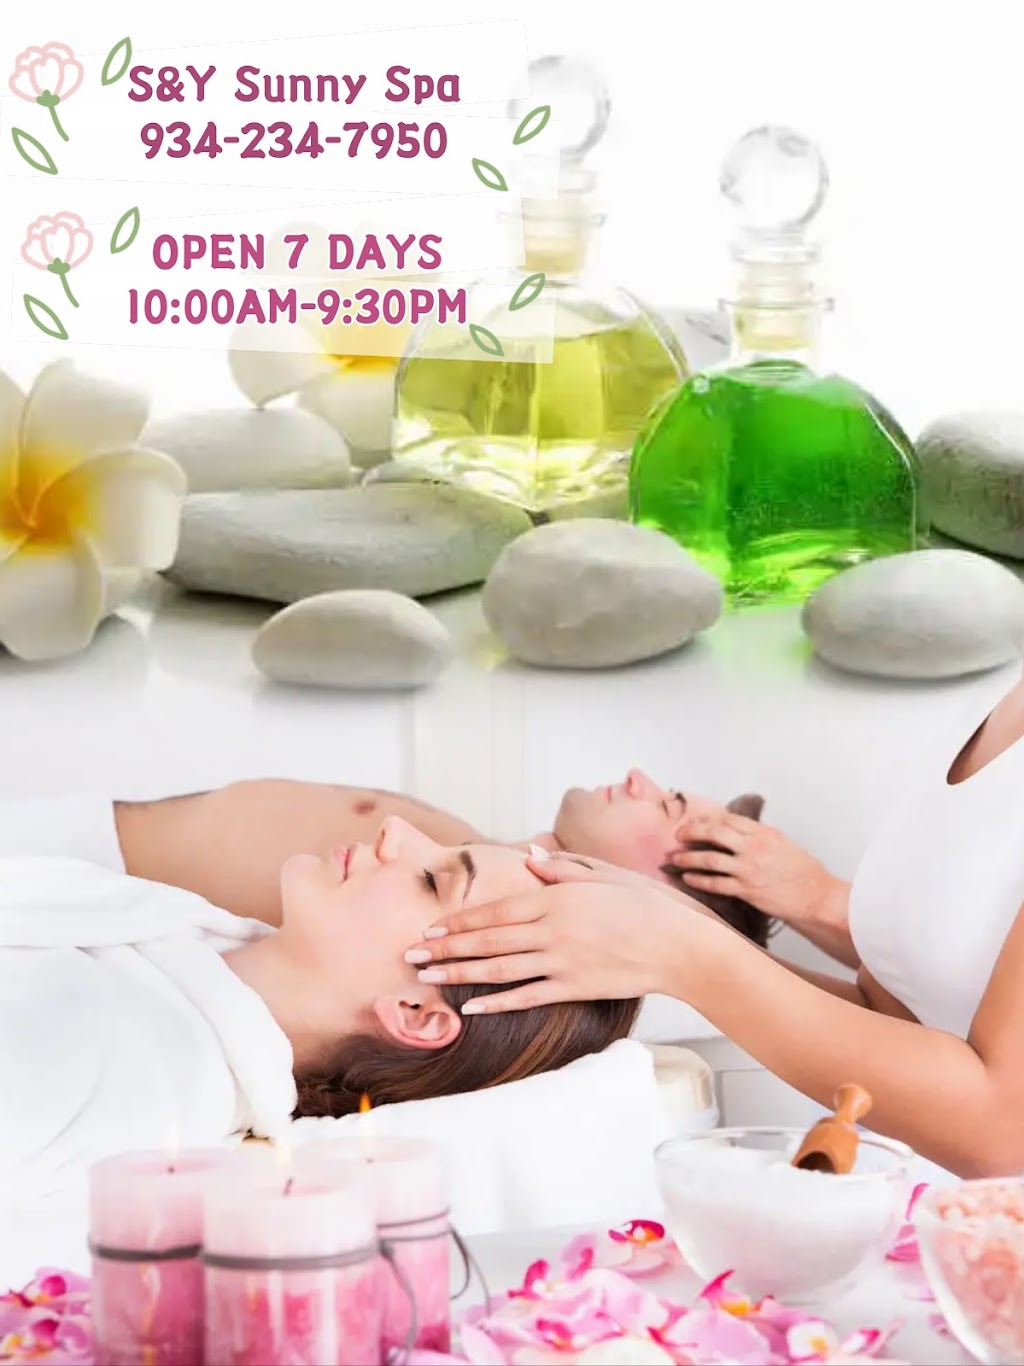 S&Y Sunny Spa | 597 Middle Neck Rd, Great Neck, NY 11023 | Phone: (934) 234-7950